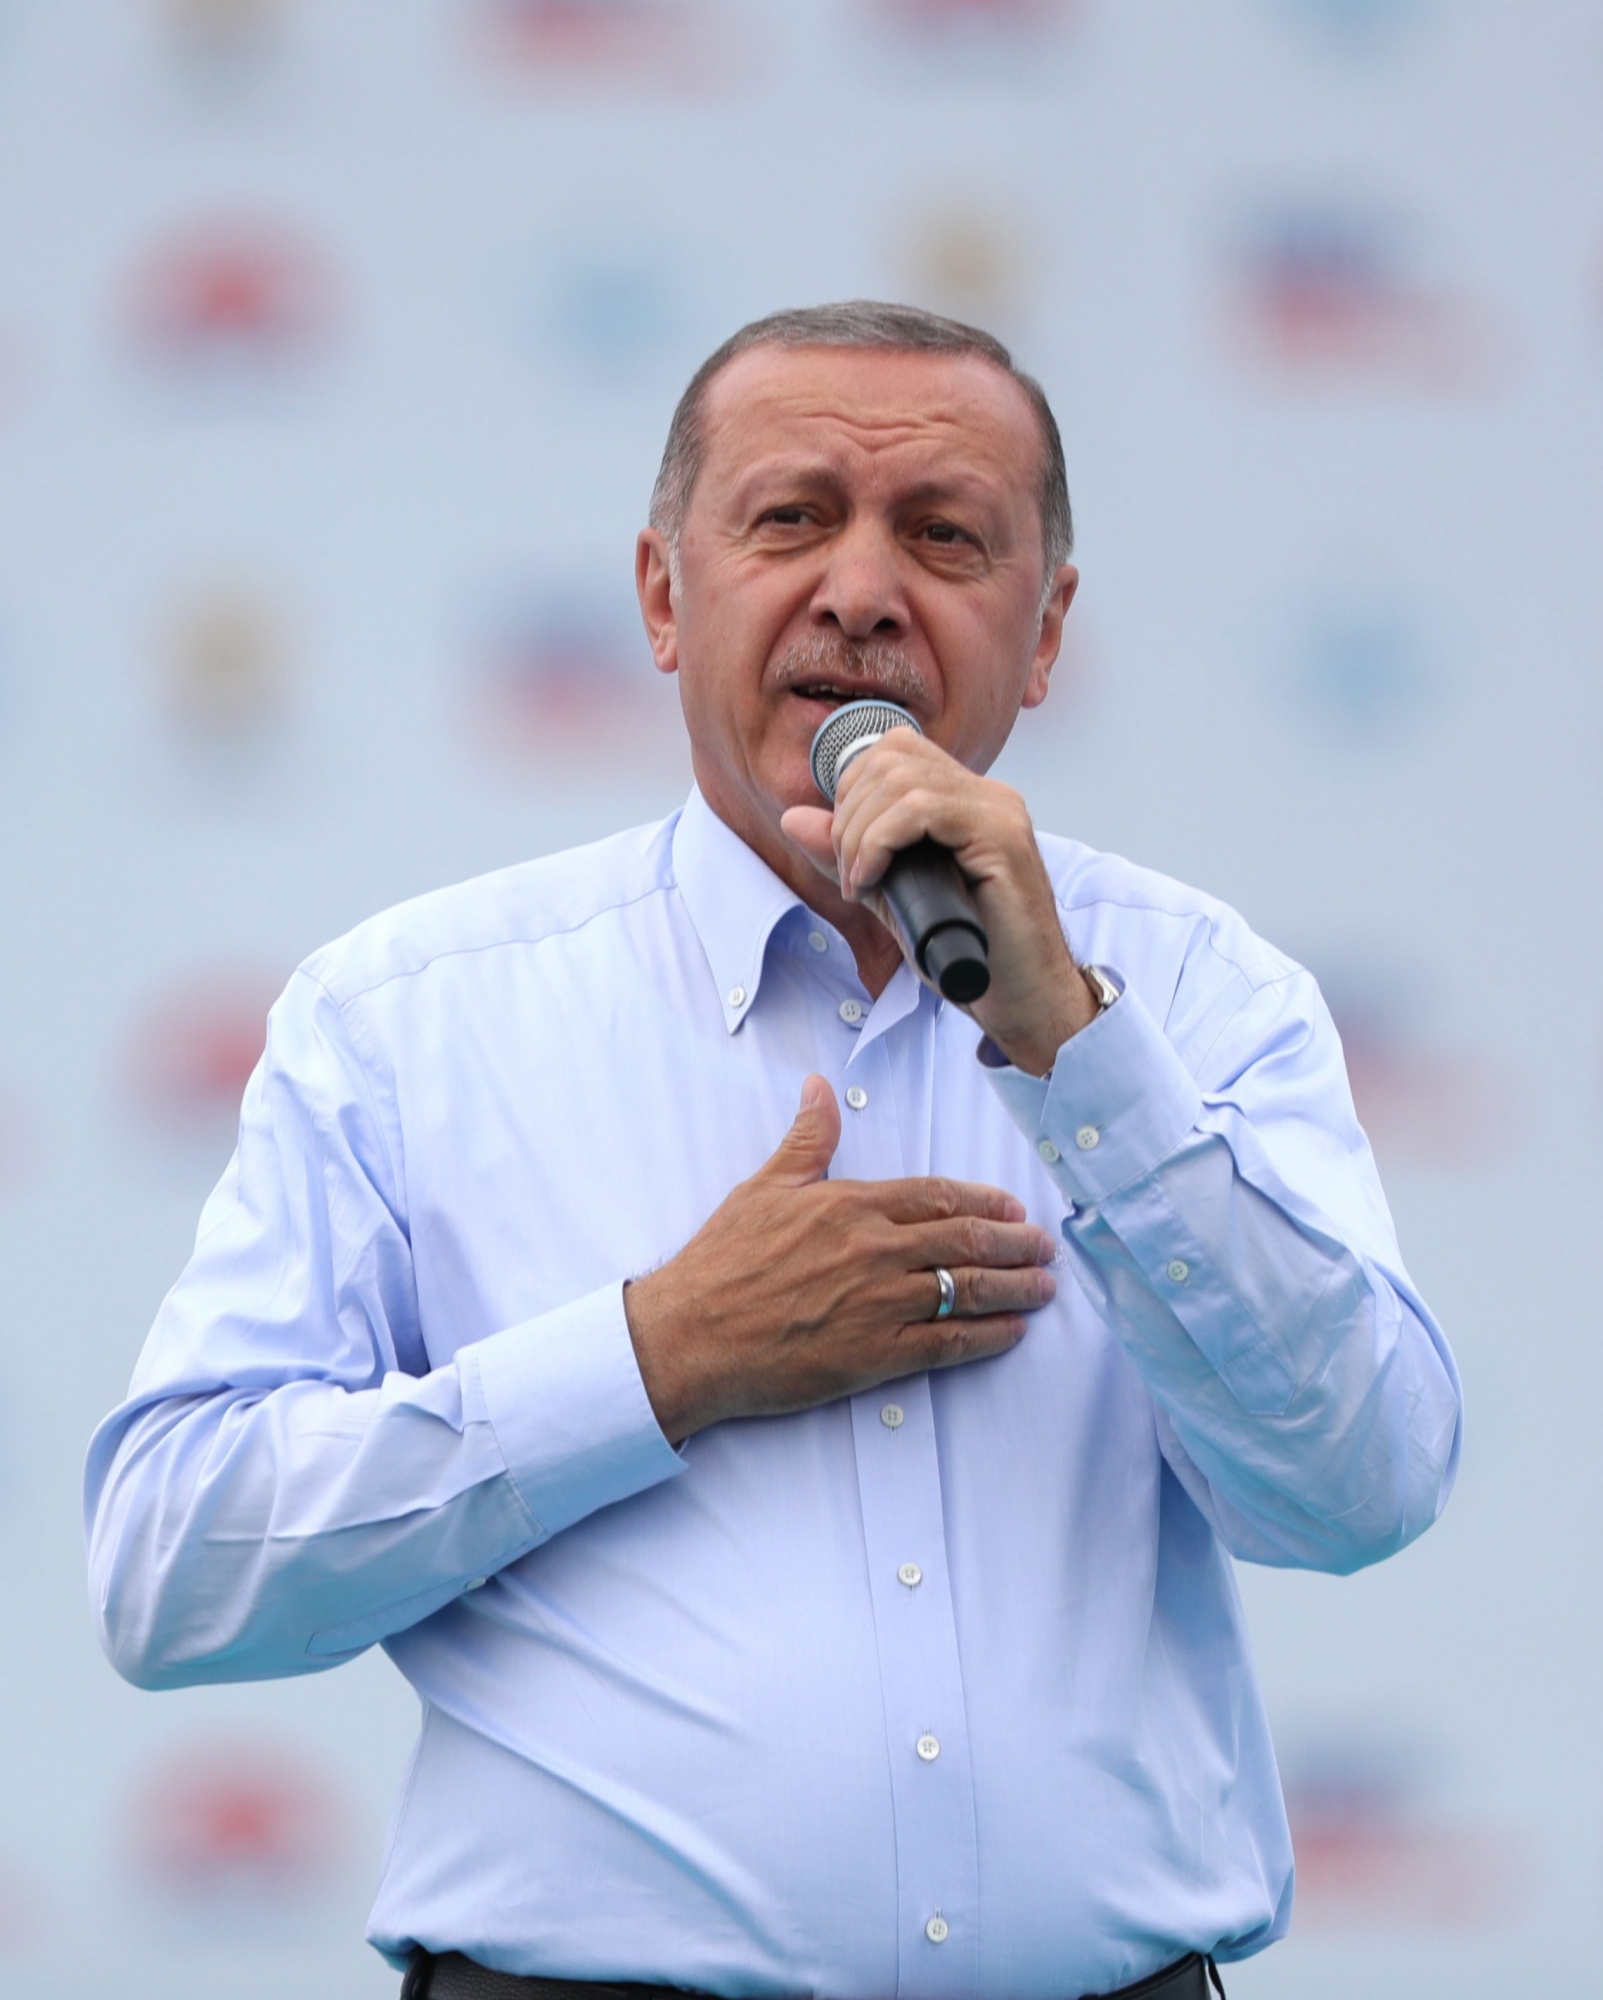 epa06816109 Turkish President Recep Tayyip Erdogan speaks during an election campaign rally of Justice and Development Party (AK Party) in Istanbul, Turkey, 17 June 2018. Turkish President Erdogan announced on 18 April 2018 that Turkey will hold snap elections on 24 June 2018. The presidential and parliamentary elections were scheduled to be held in November 2019, but government has decided the change the date following the recommendation of the Nationalist Movement Party (MHP) leader Devlet Bahceli.  EPA/ERDEM SAHIN TURKEY ELECTIONS ERDOGAN CAMPAIGN